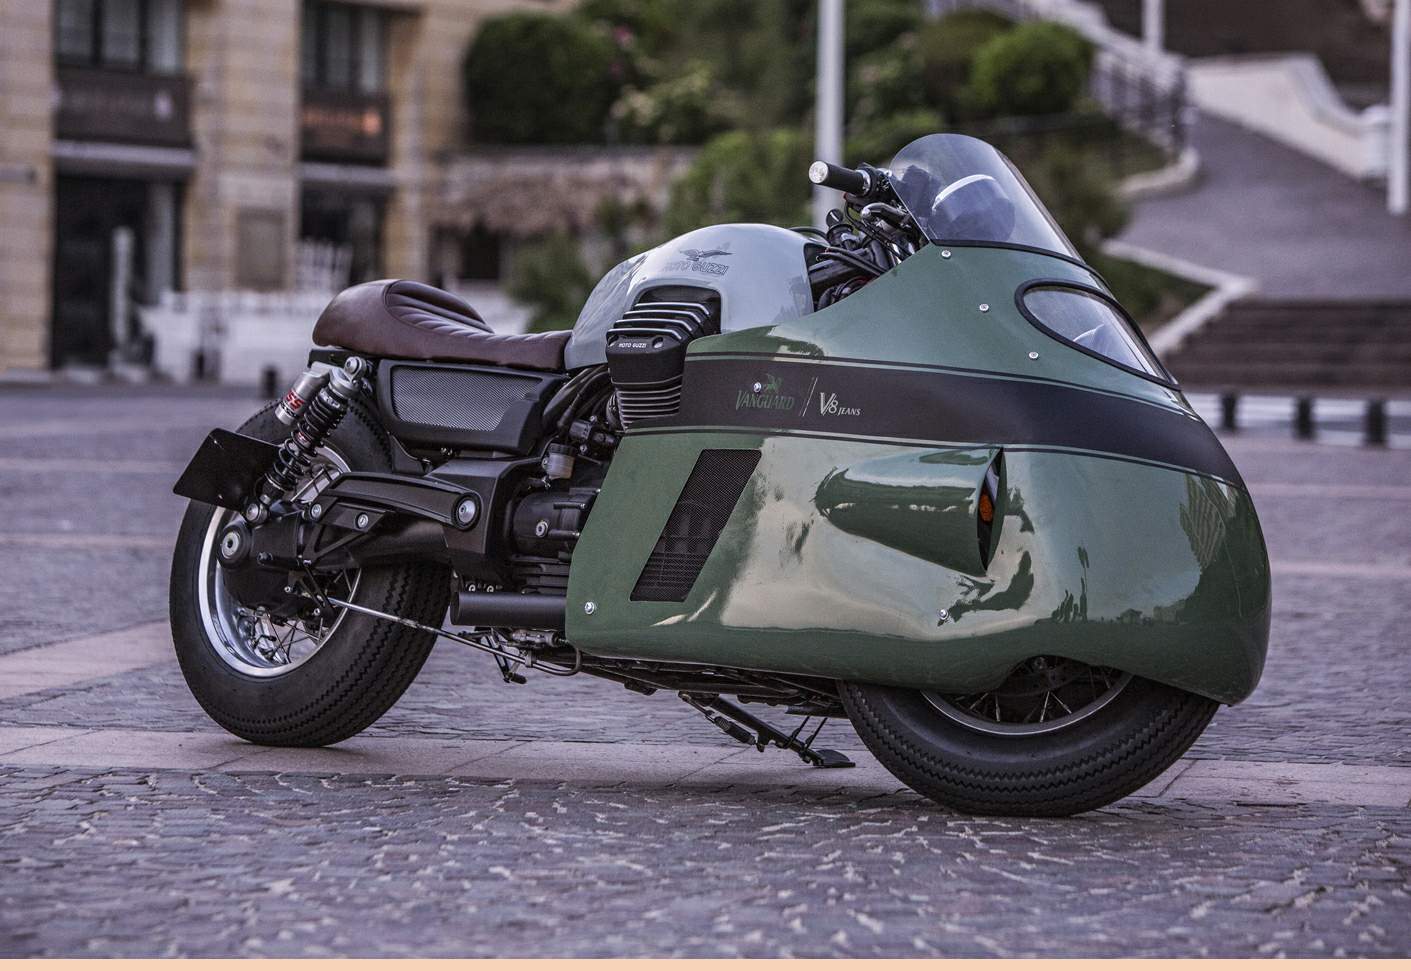 Vanguard Moto Guzzi V8 homage design by Gannet 
				Design Made by Numbnut Motorcycles For Sale Specifications, Price and Images